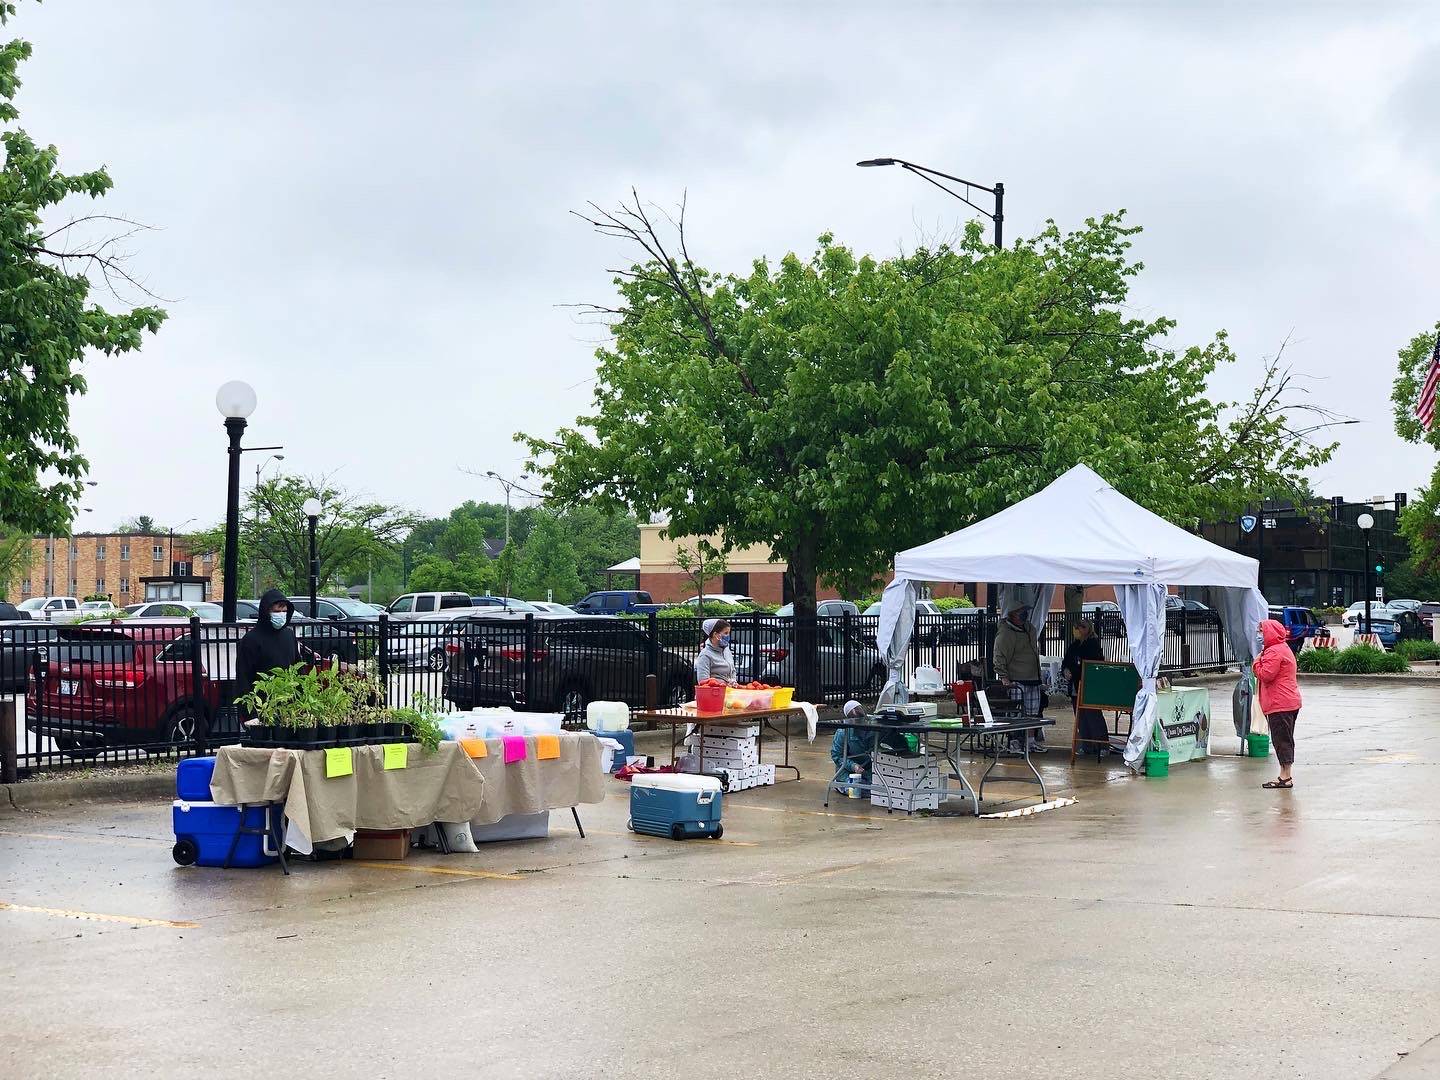 Outdoor Tuesday farmers' market in Champaign. Photo by Alyssa Buckley.